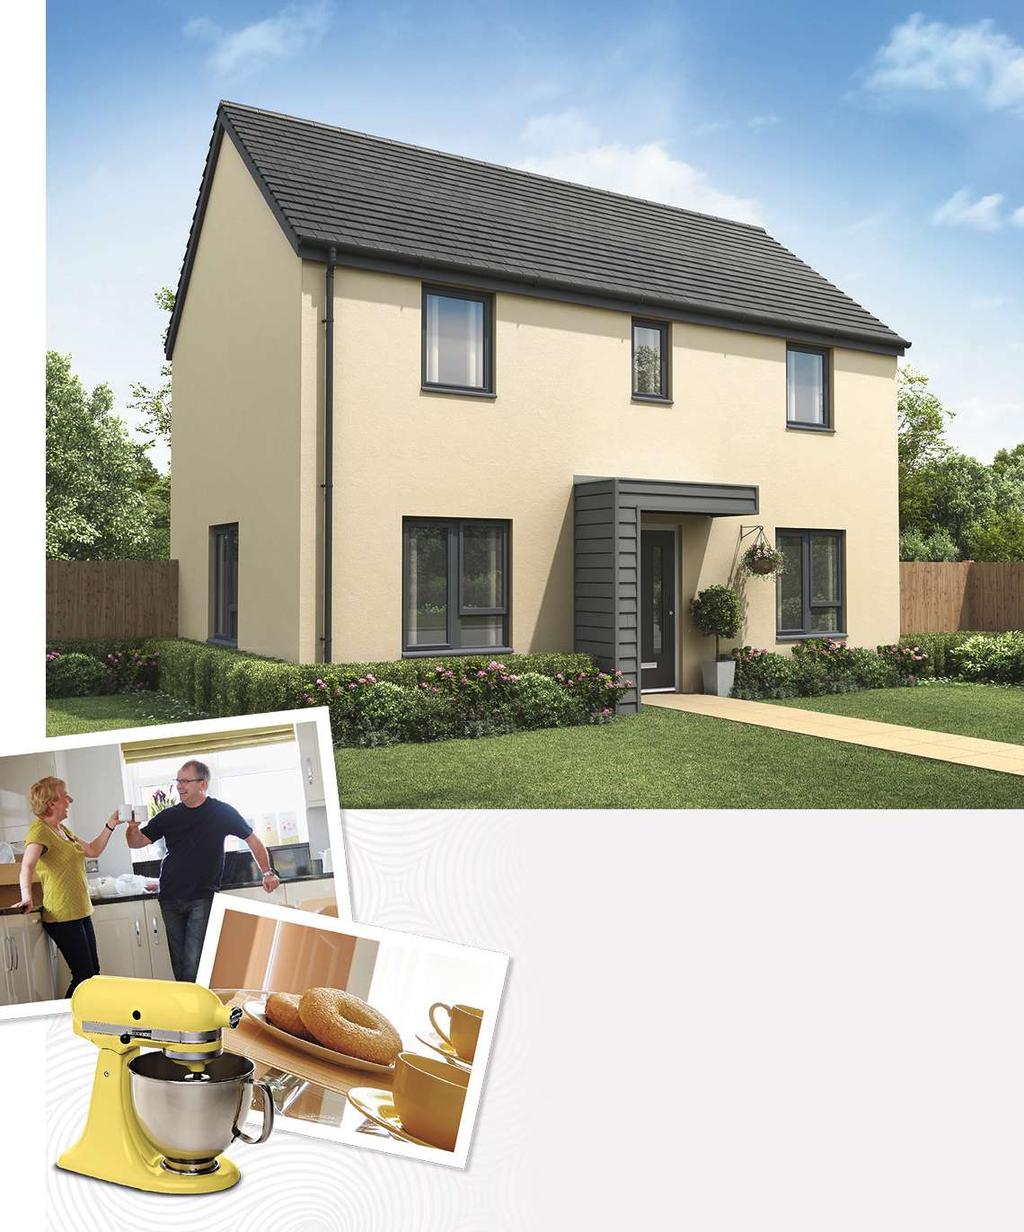 LATITUDE @ THE QUAYS The Easedale 3 bedroom home ith a carefully considered layout, the Easedale is a wonderful 3 bedroom home.